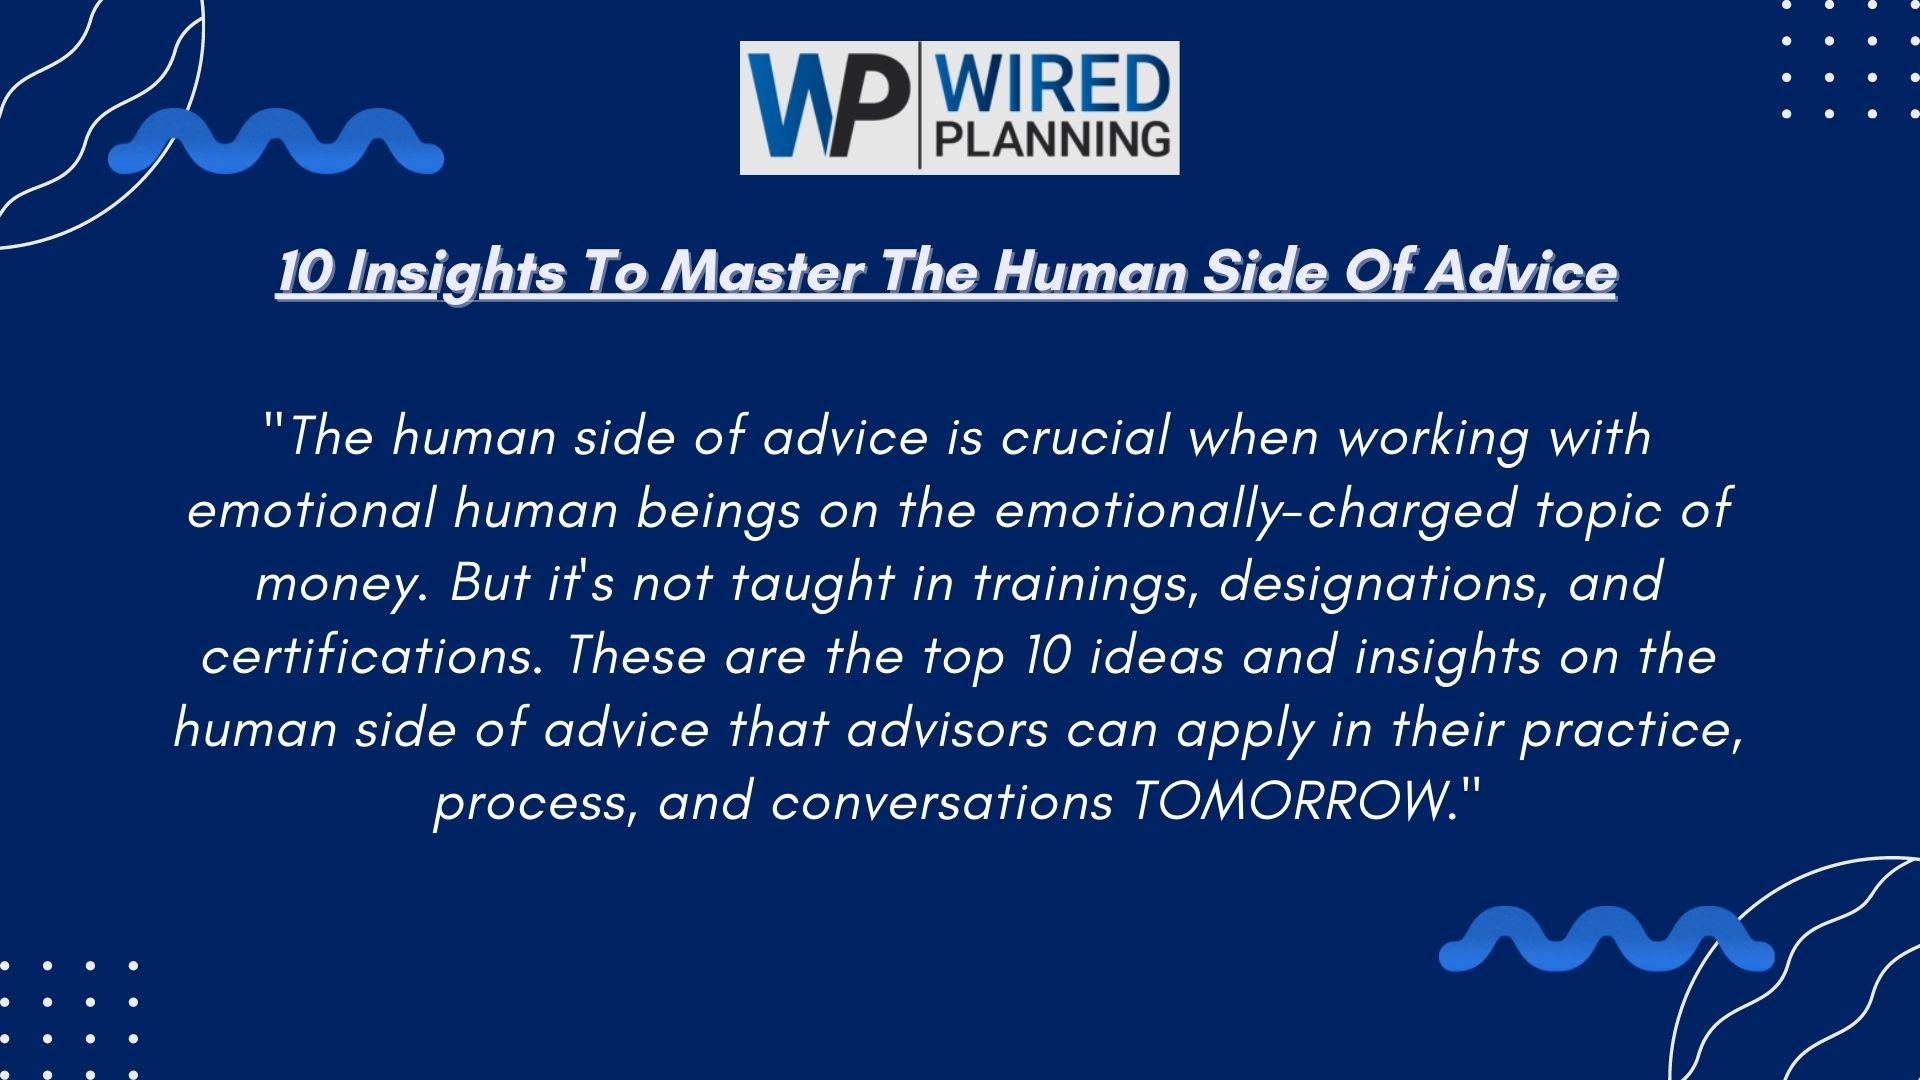 10 insights master the human side of advice